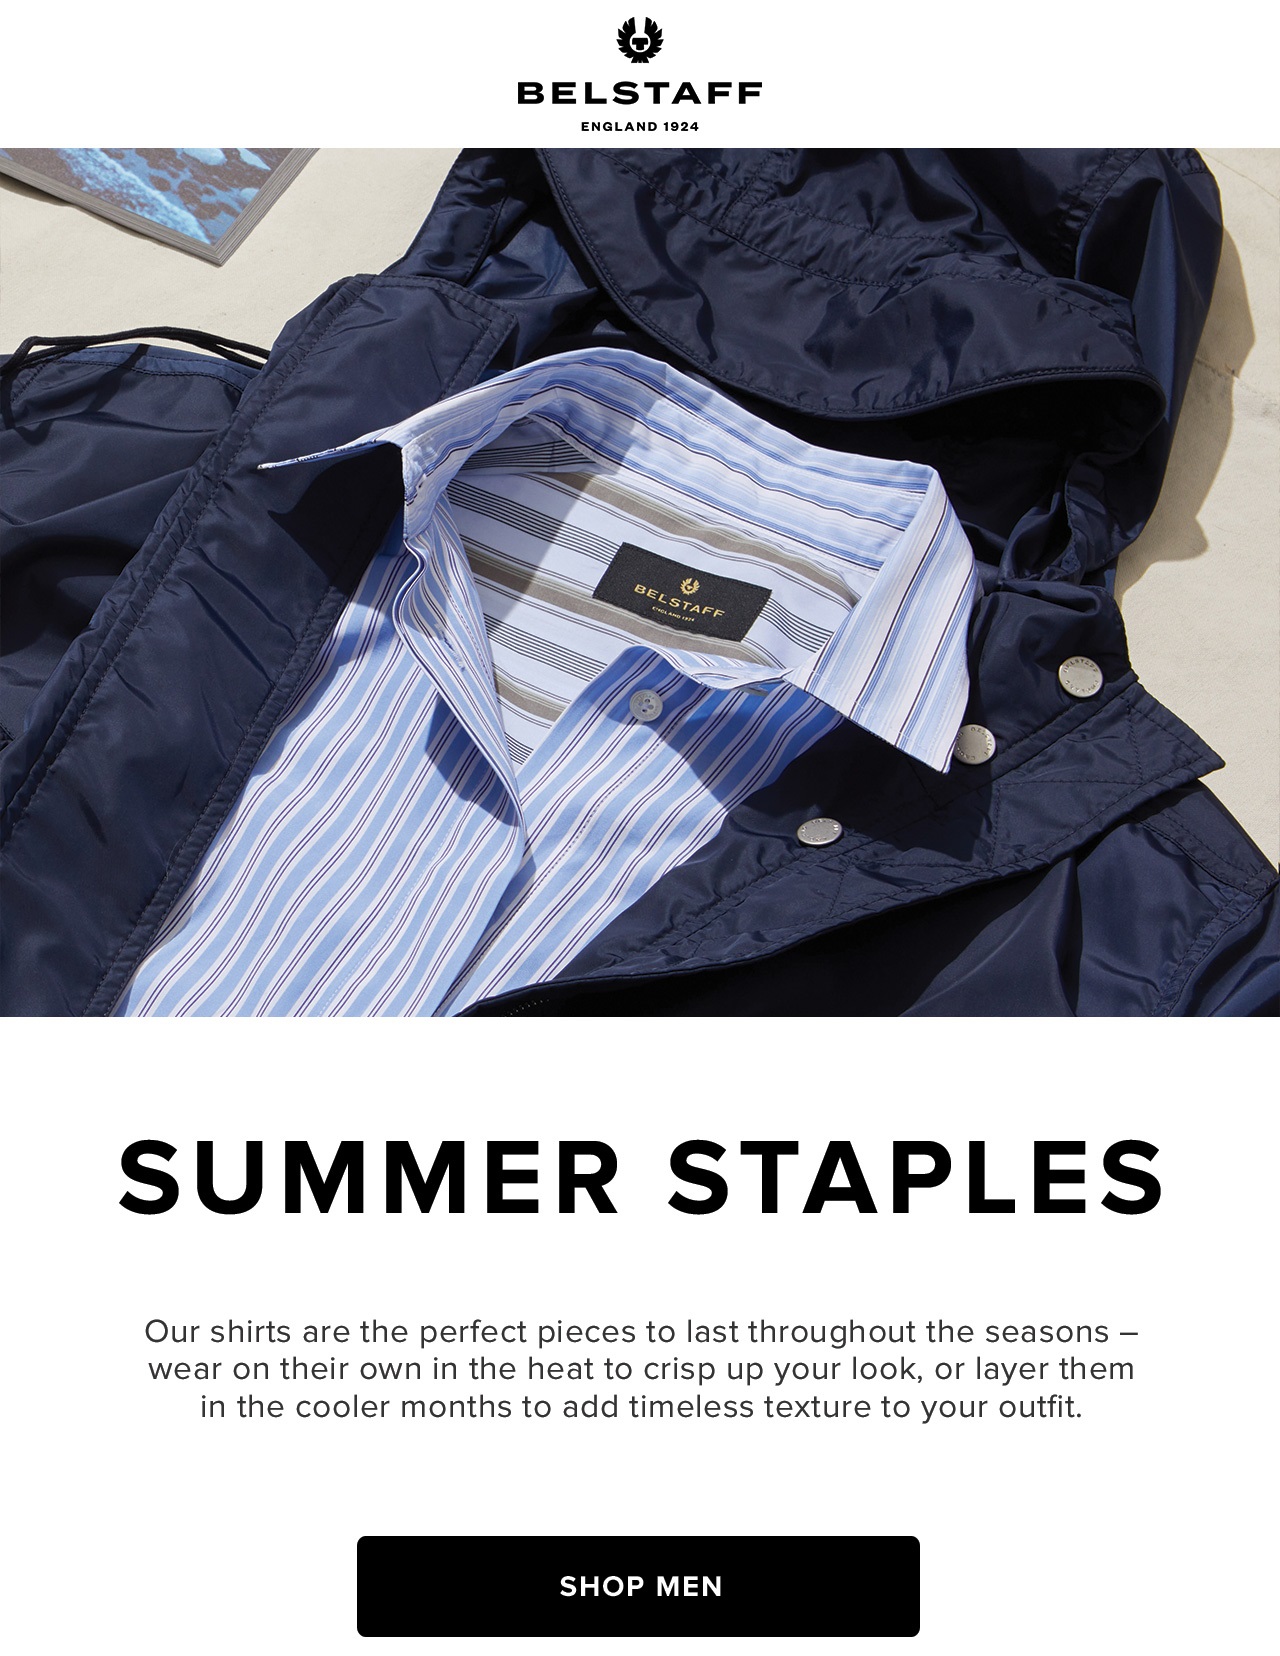 Our shirts are the perfect pieces to last throughout the seasons - wear on their own in the heat to crisp up your look, or layer them in the cooler months to add timeless texture to your outfit. Shop Men.